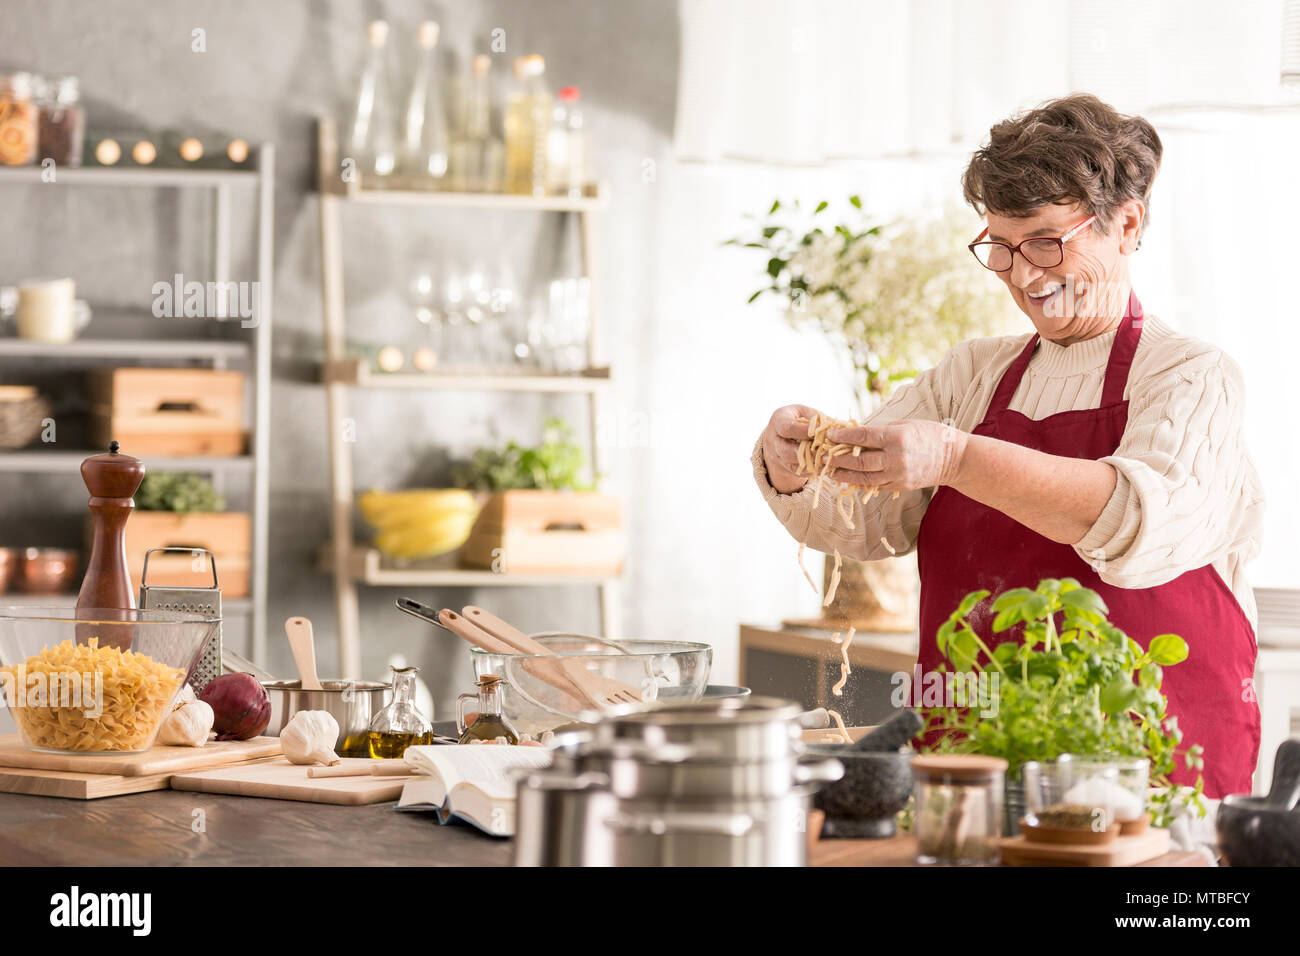 Happy senior woman cooking in her modern kitchen Stock Photo